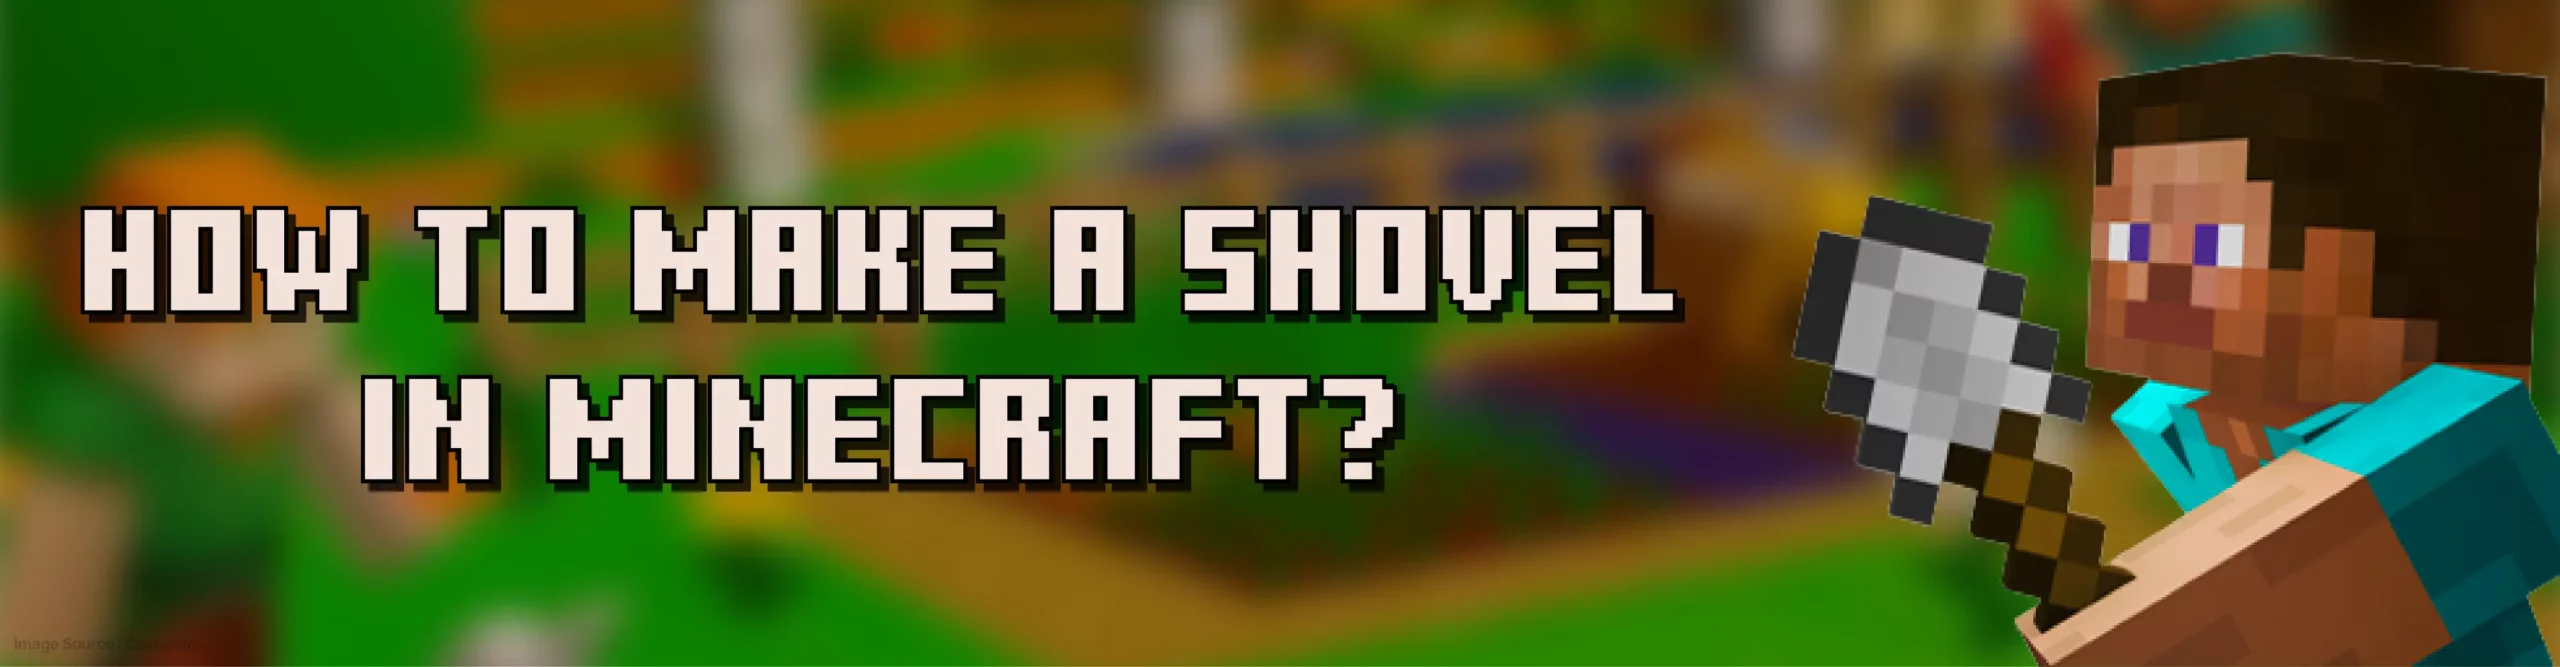 How to Make a Shovel in Minecraft